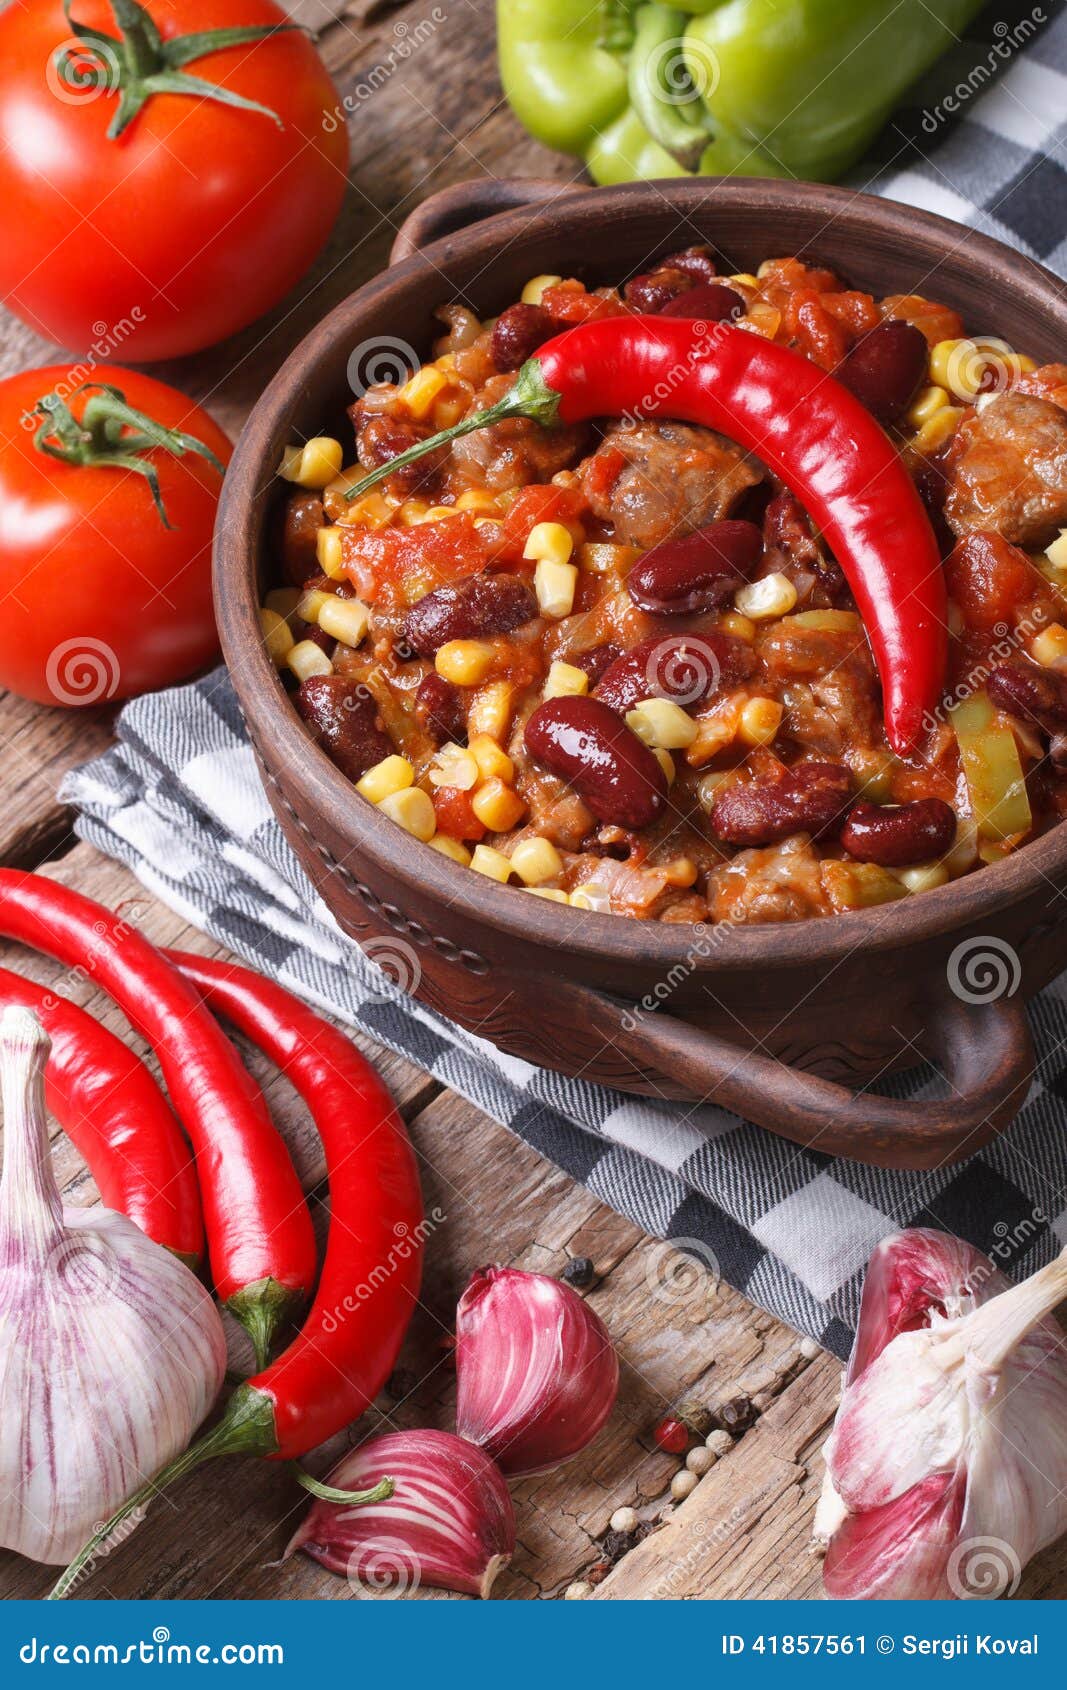 Chili Con Carne in a Pot and Ingredients. Vertical Stock Image - Image ...